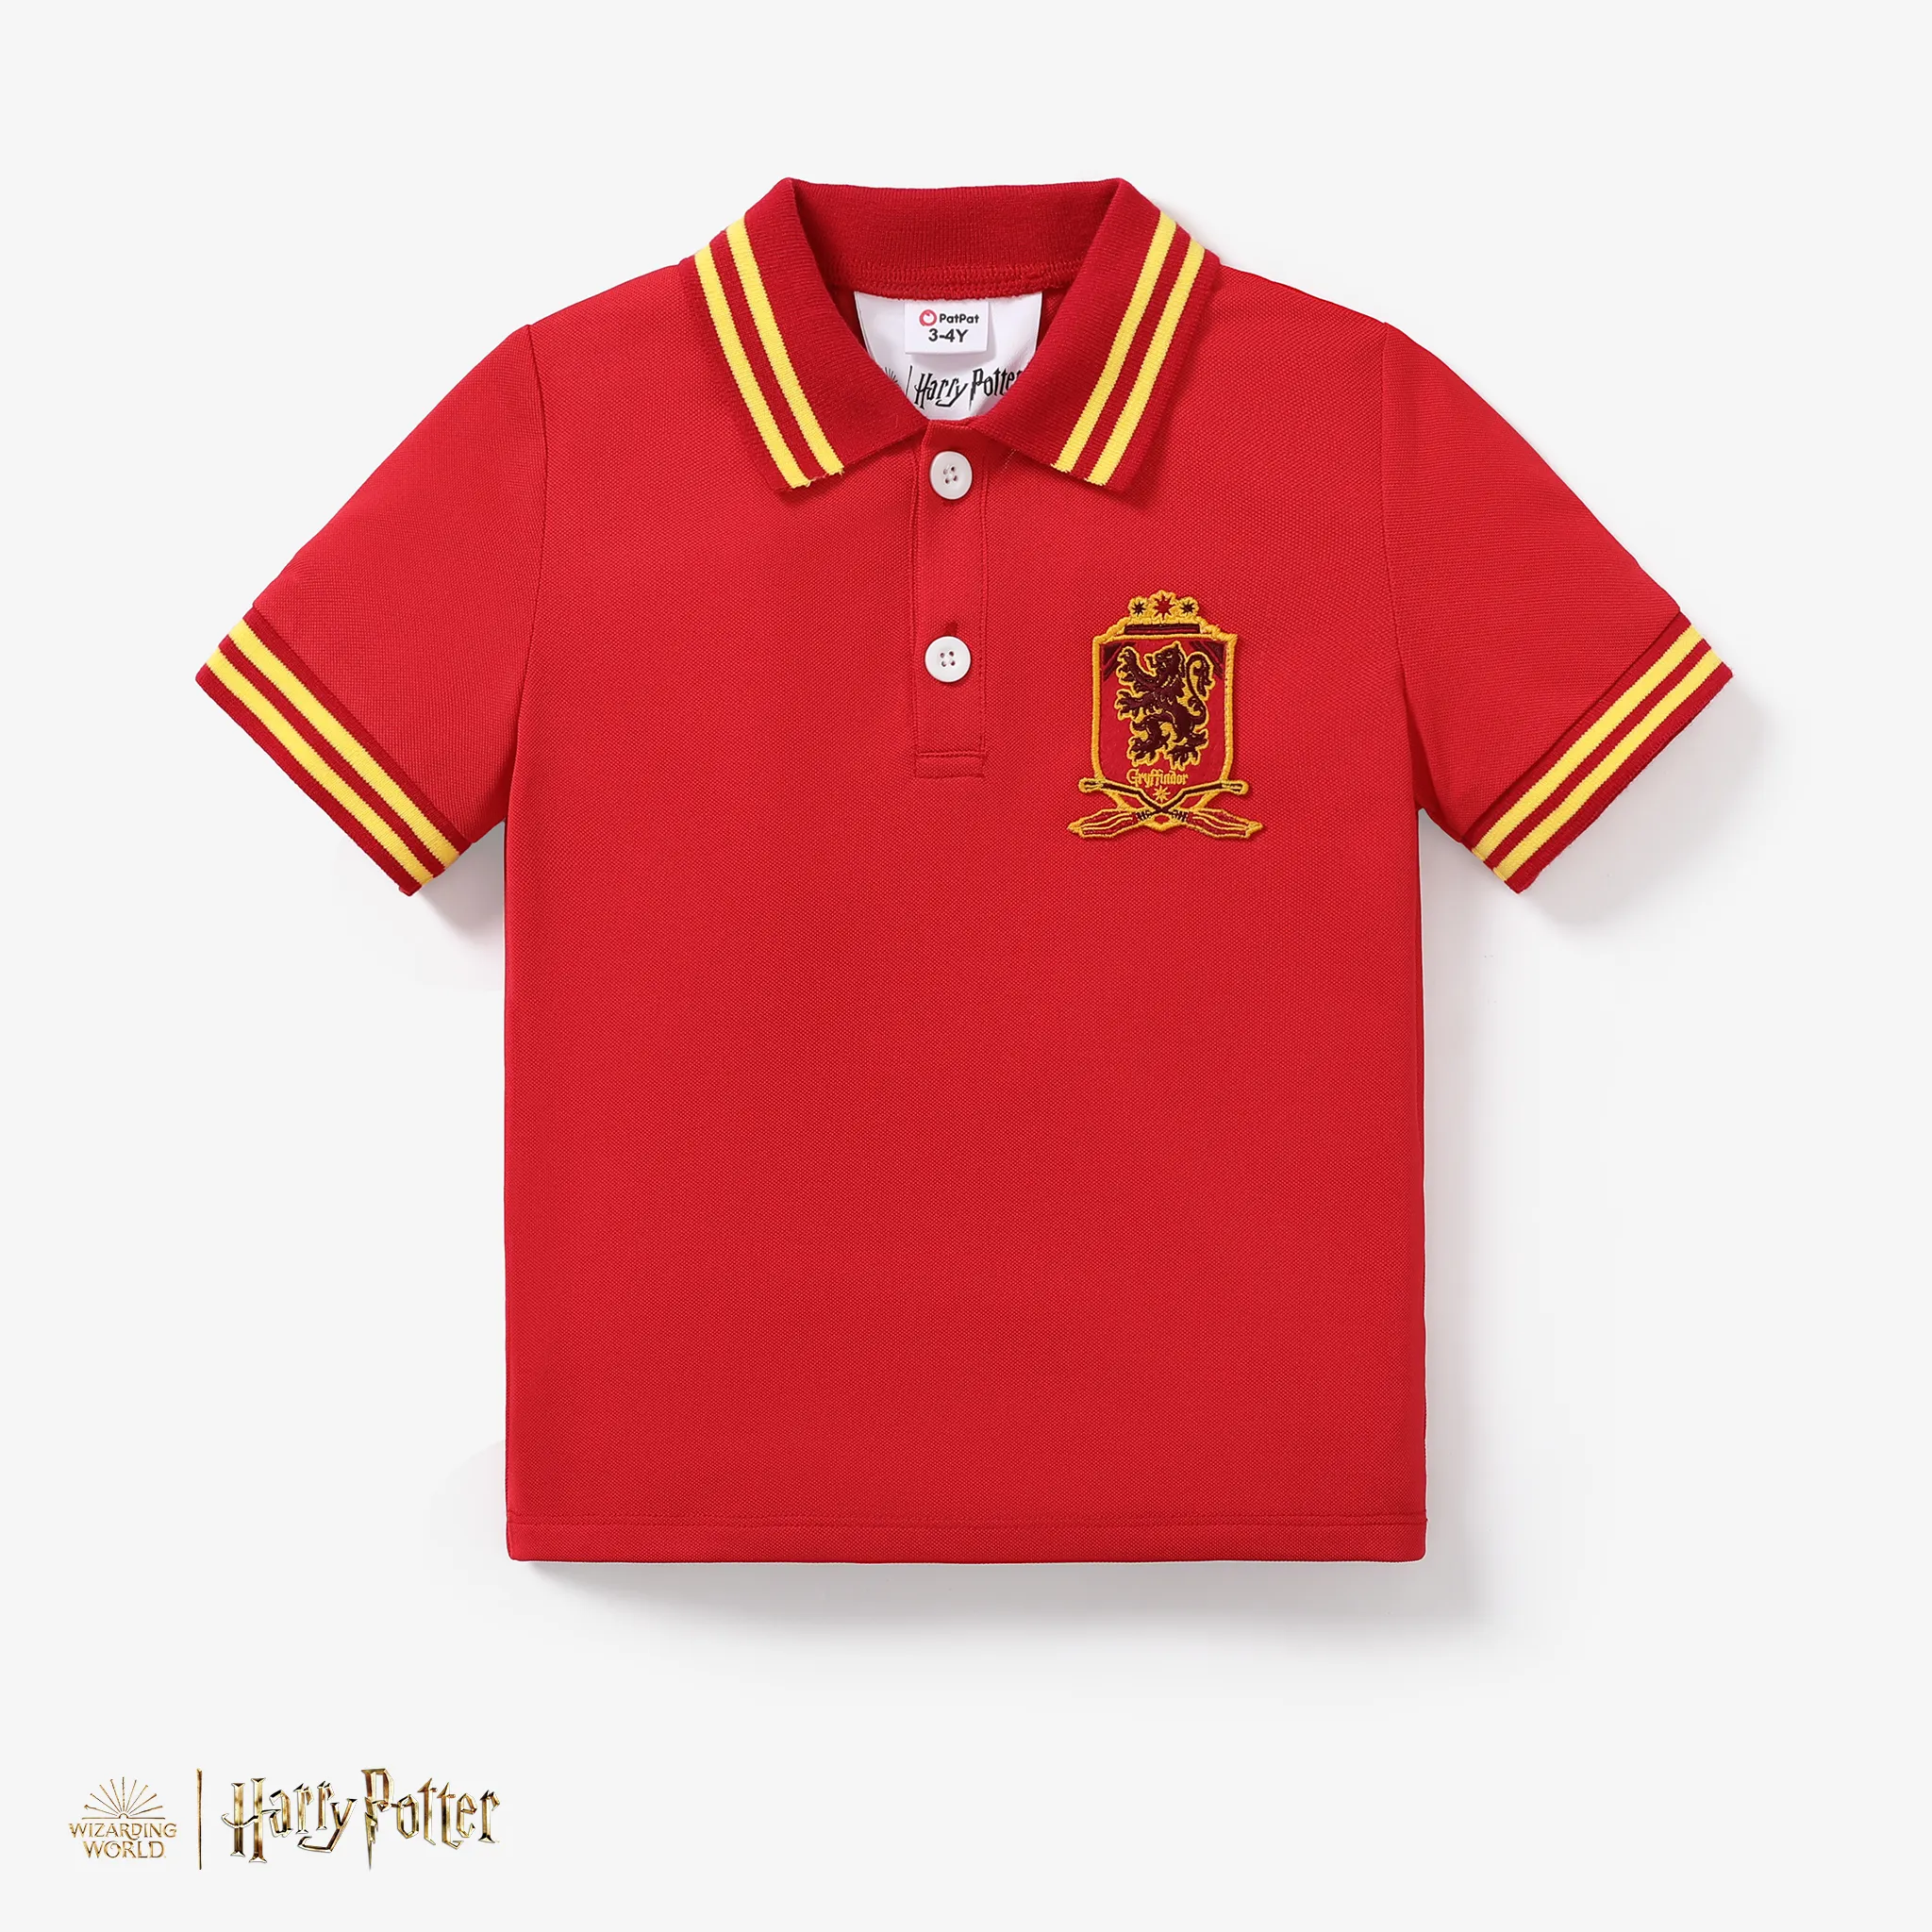 Harry Potter Toddler/Kid Boy 1pc Chess Grid Pattern Preppy Style Polo Shirt Or Shorts